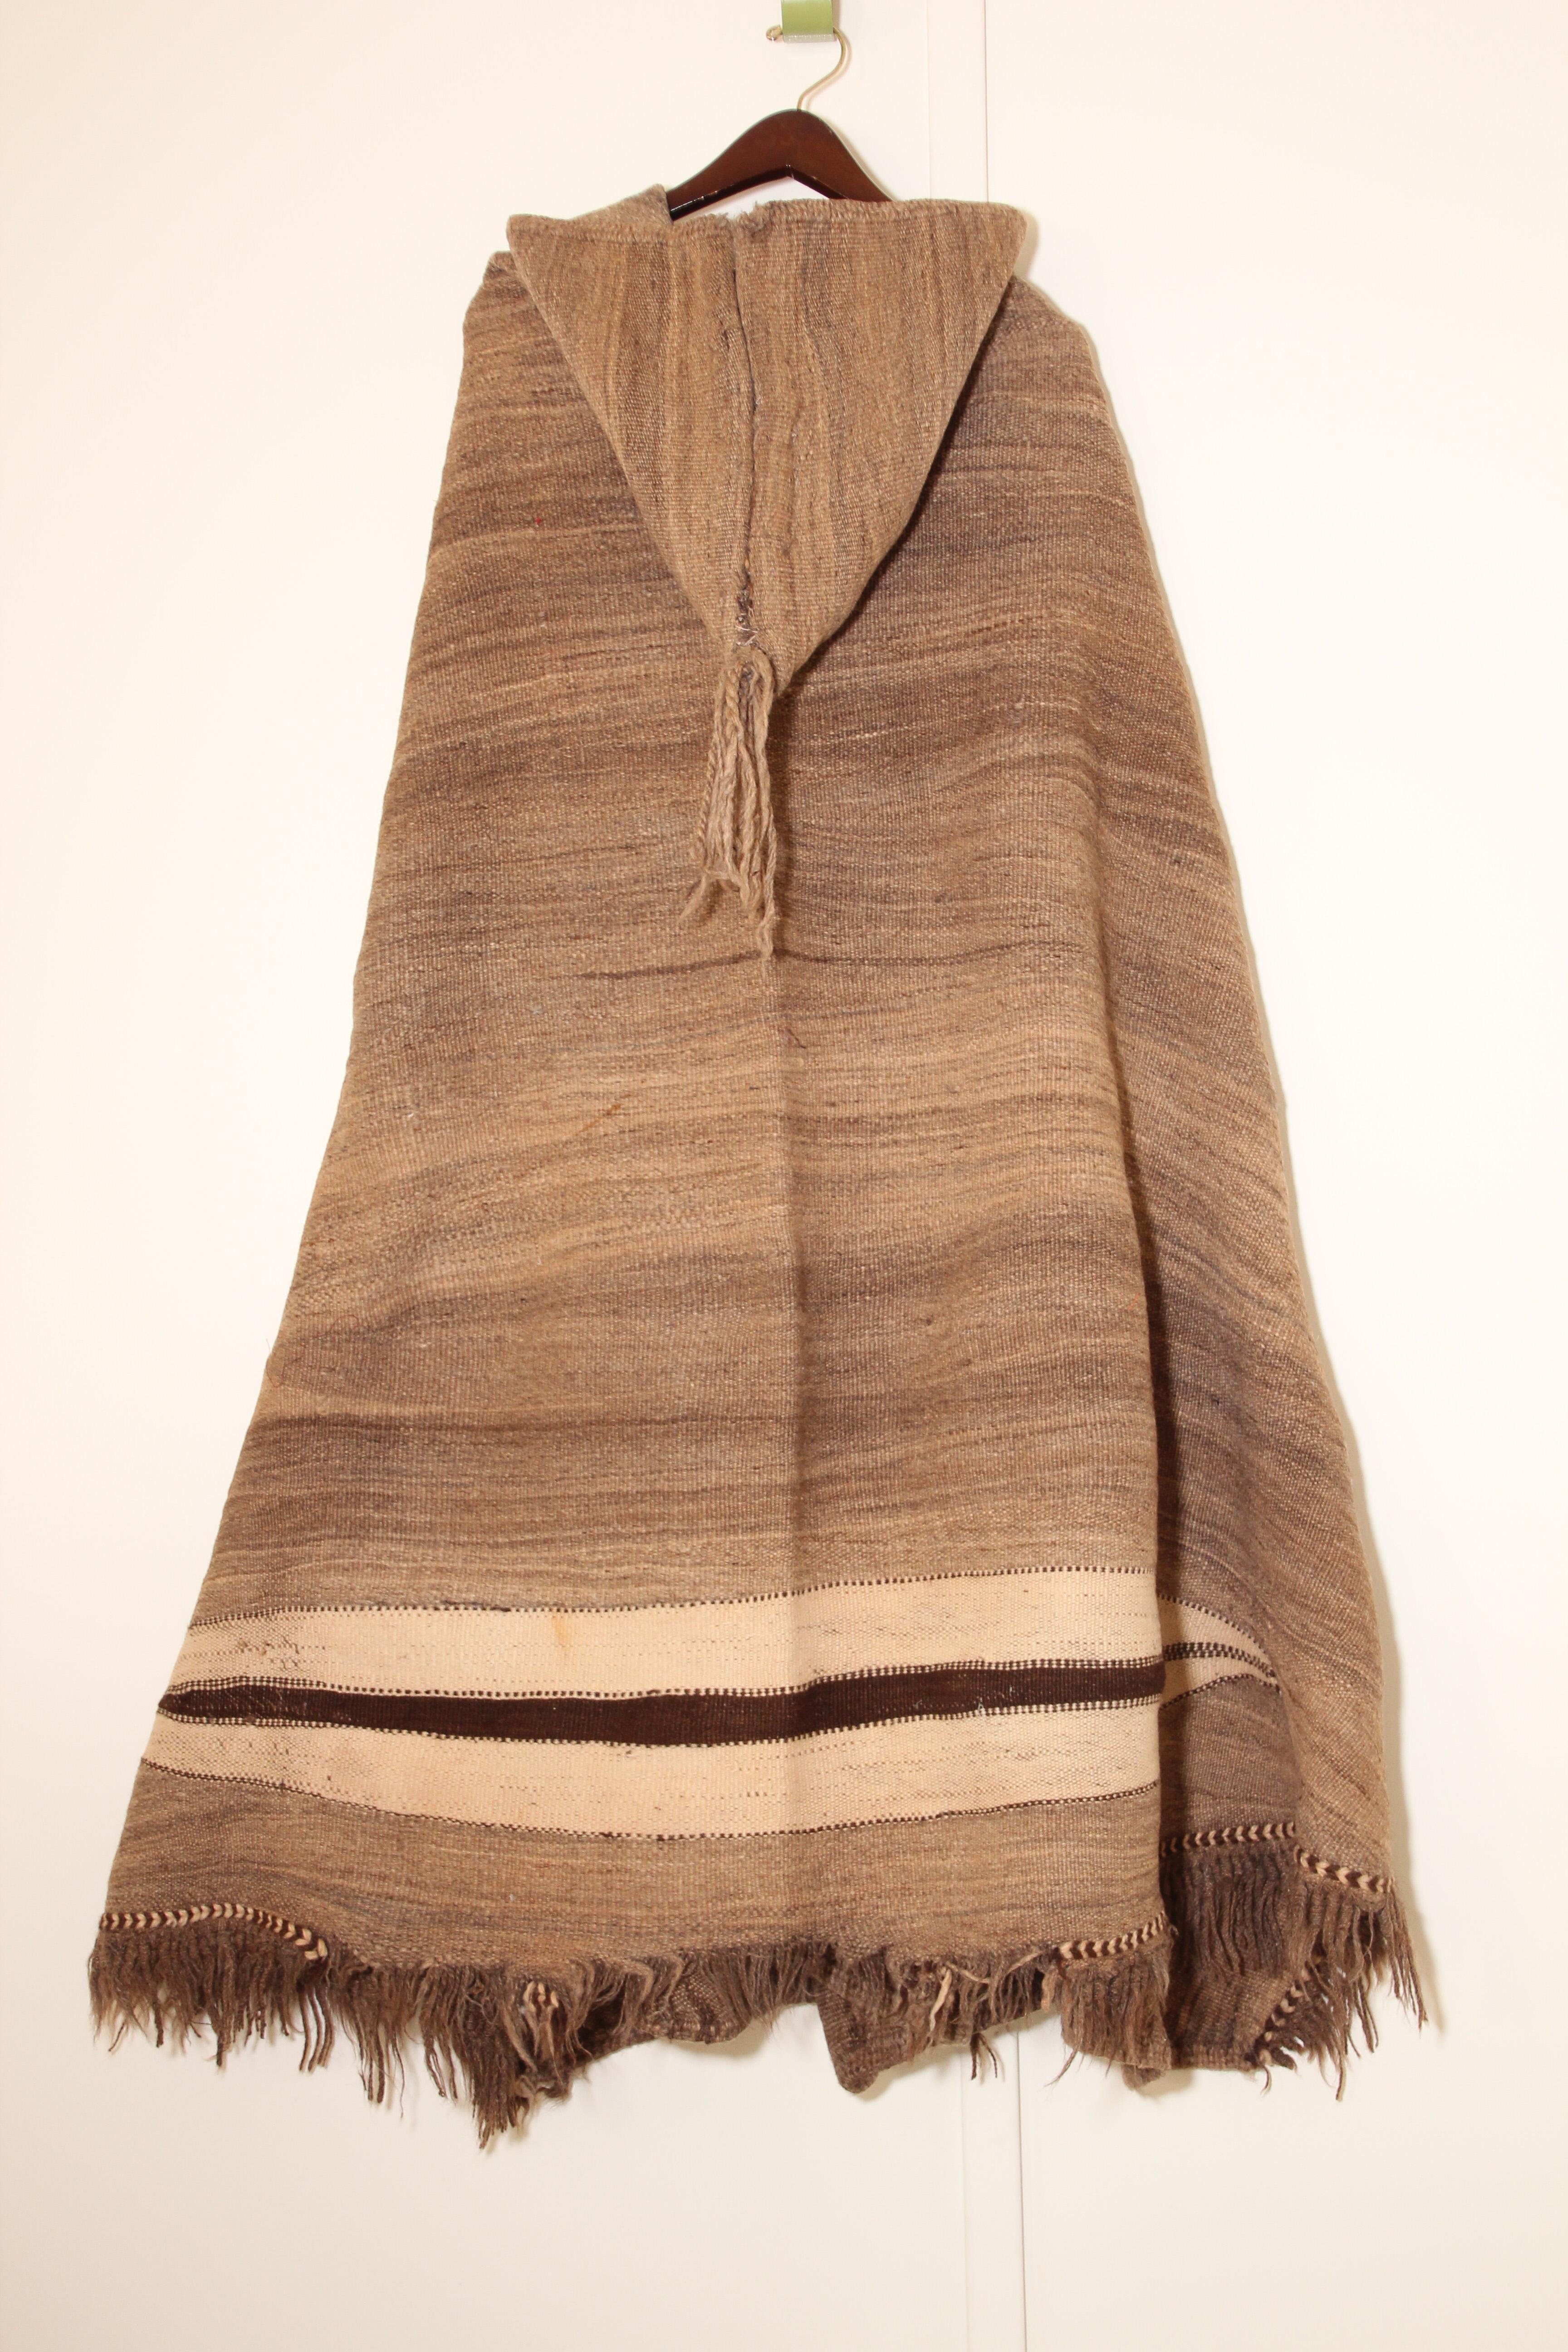 Berber Tribal North Africa Moroccan Burnous Wool Cape For Sale 3